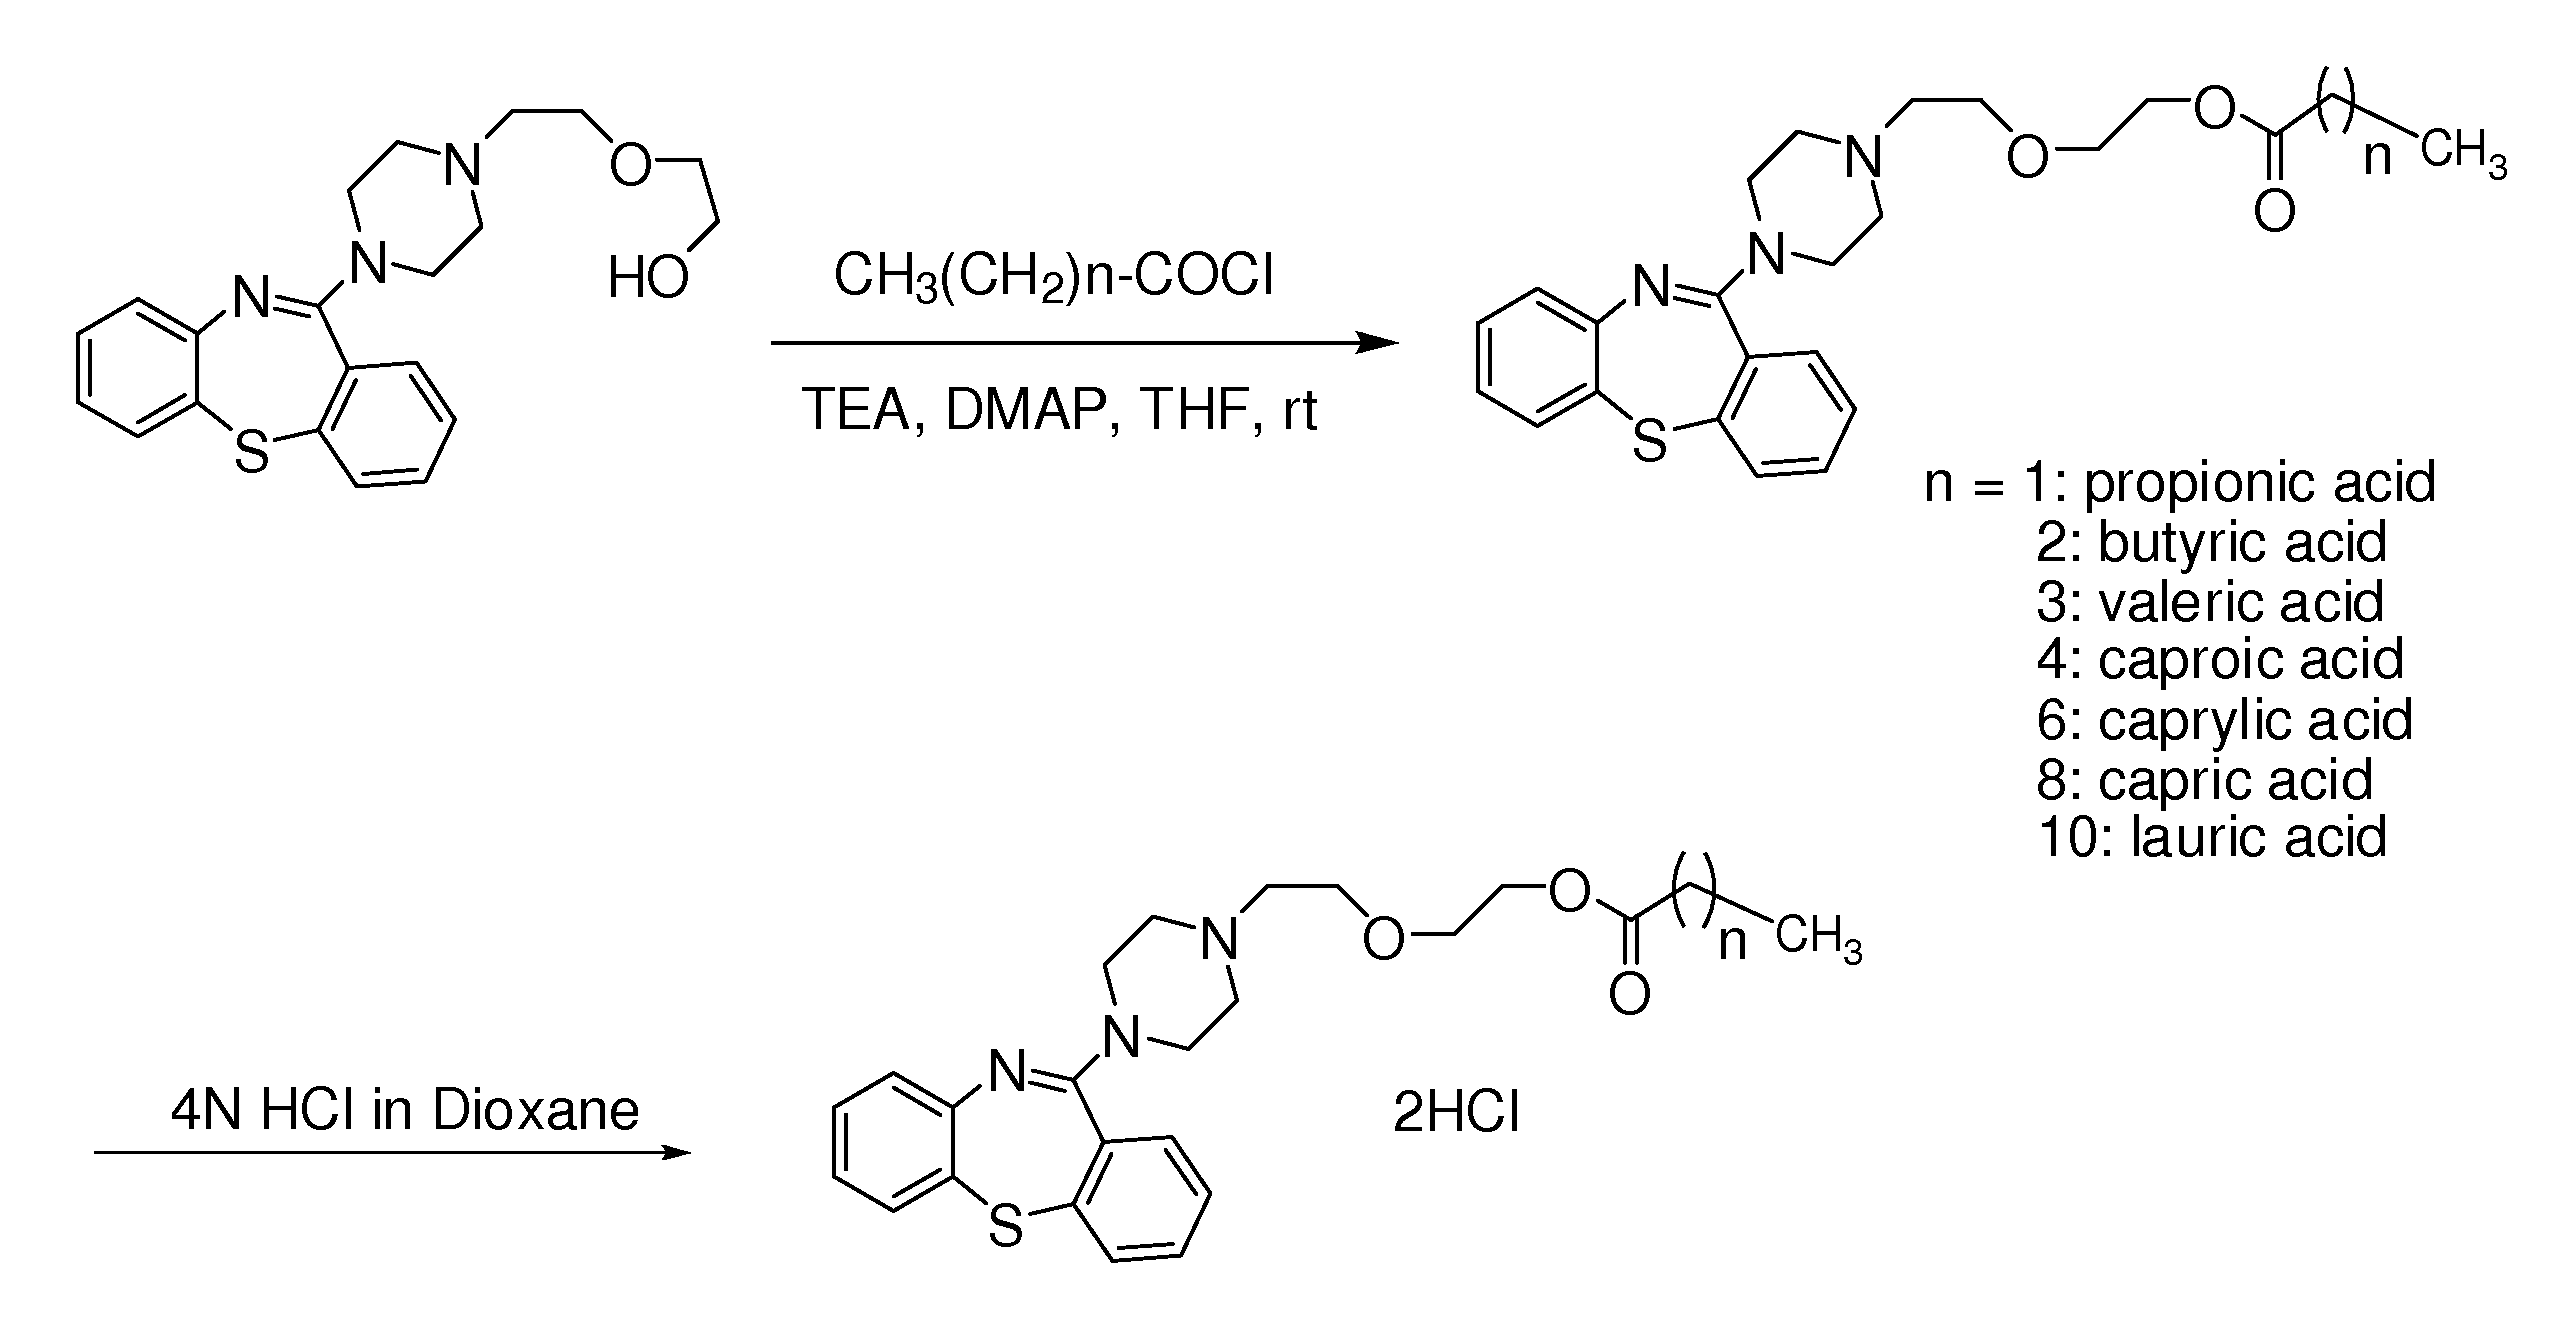 Fatty Acid Conjugates of Quetiapine, Process for Making and Using the Same